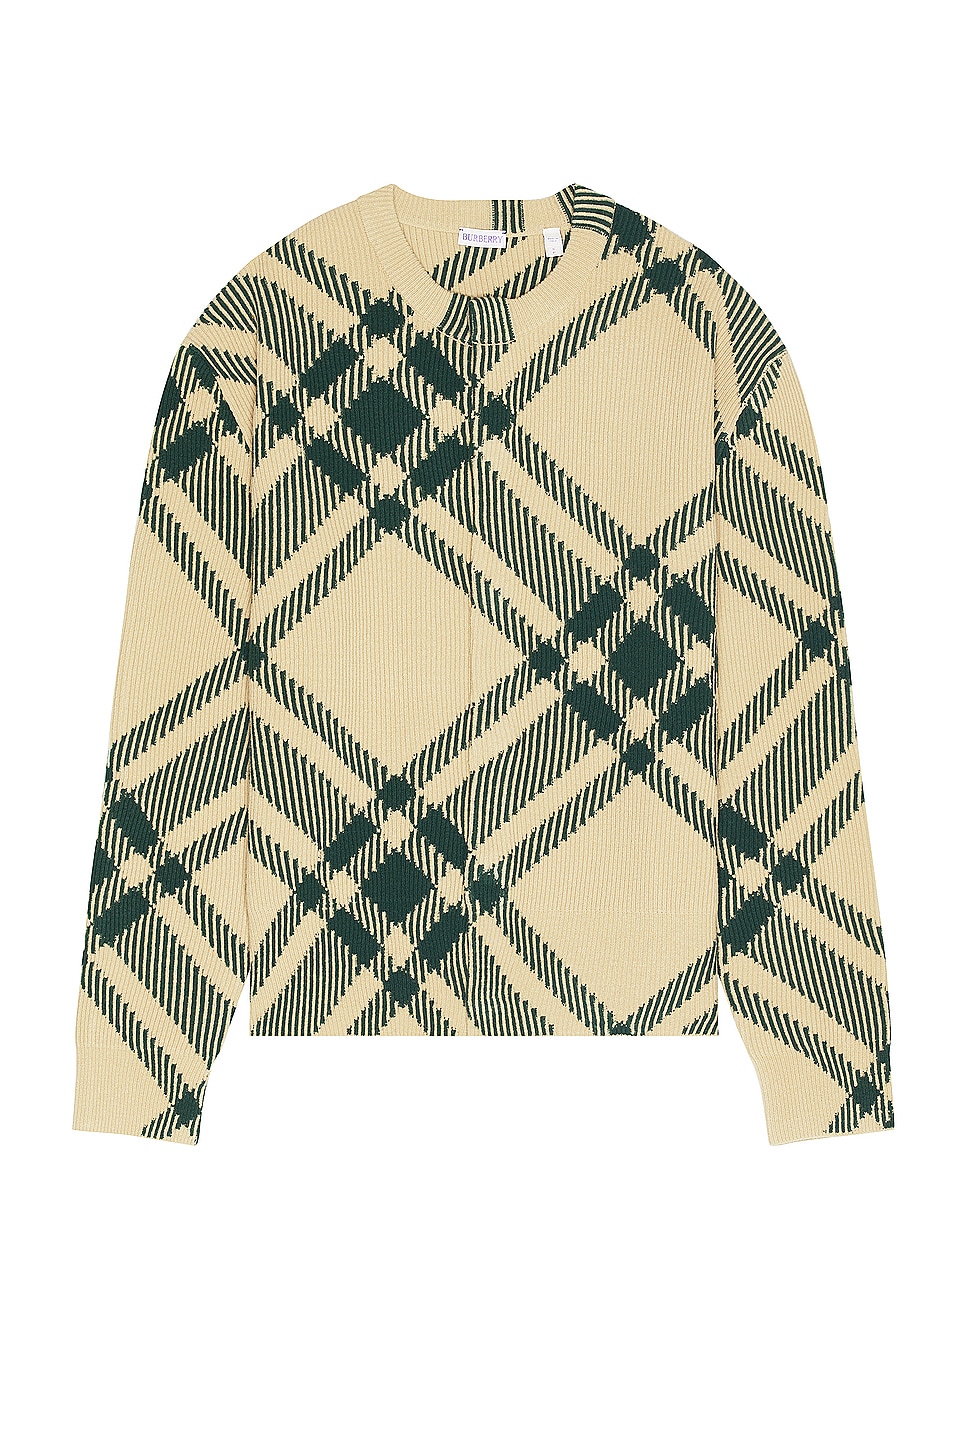 Image 1 of Burberry Check Pattern Cardigan Jacket in Flax Ip Check